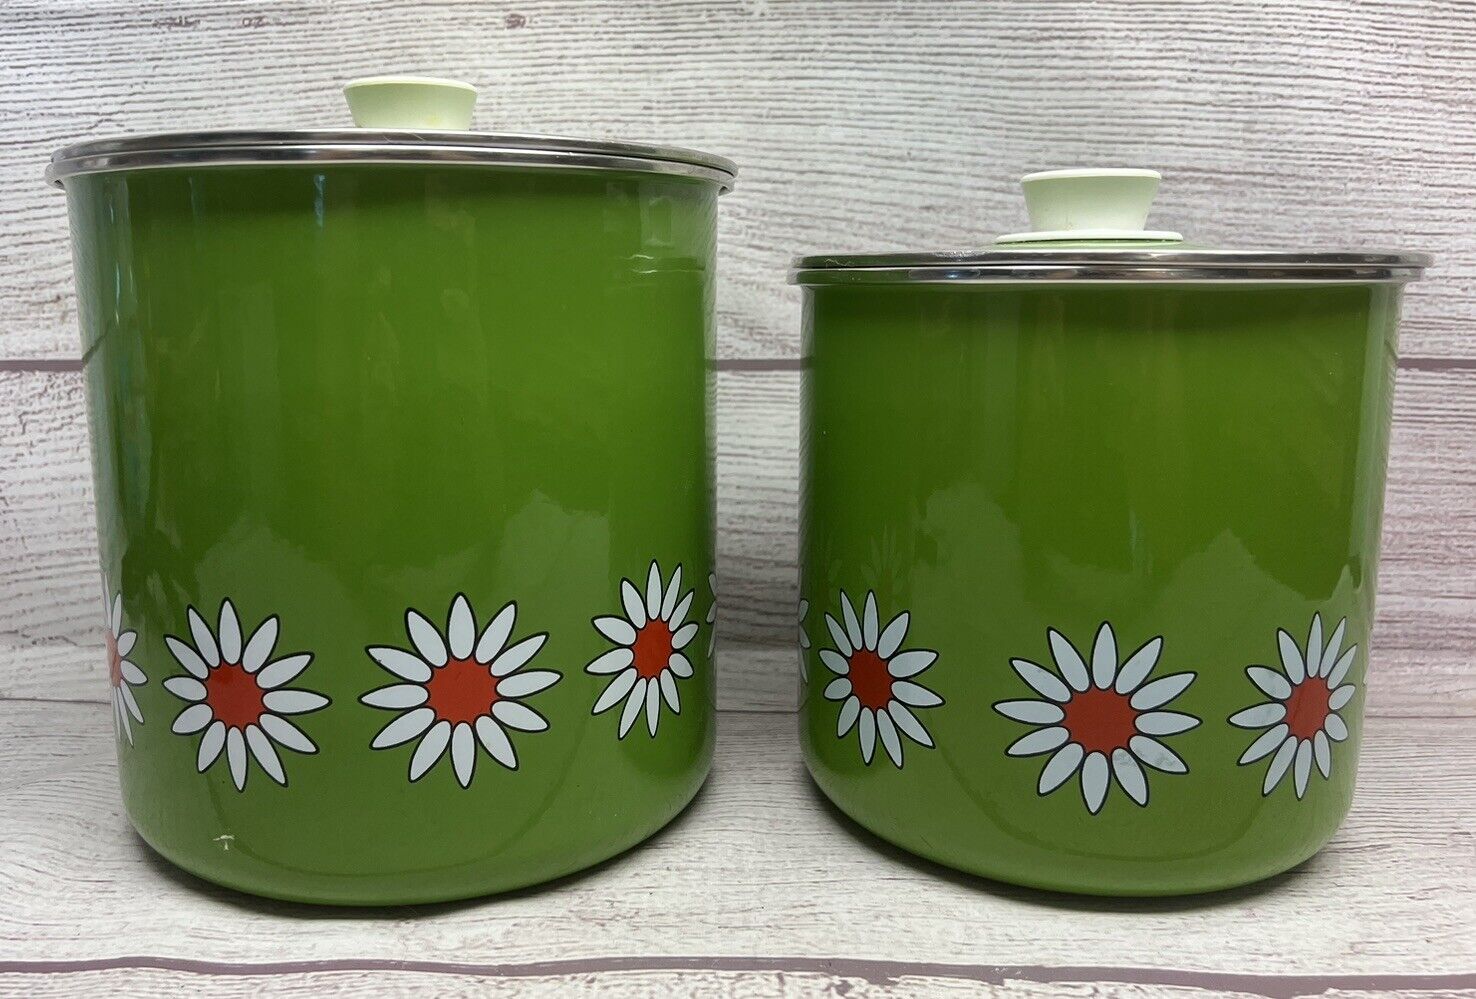 Vintage Kromex Green Daisy Aluminum Canisters Lot Of 2 1970s Flower Power Retro